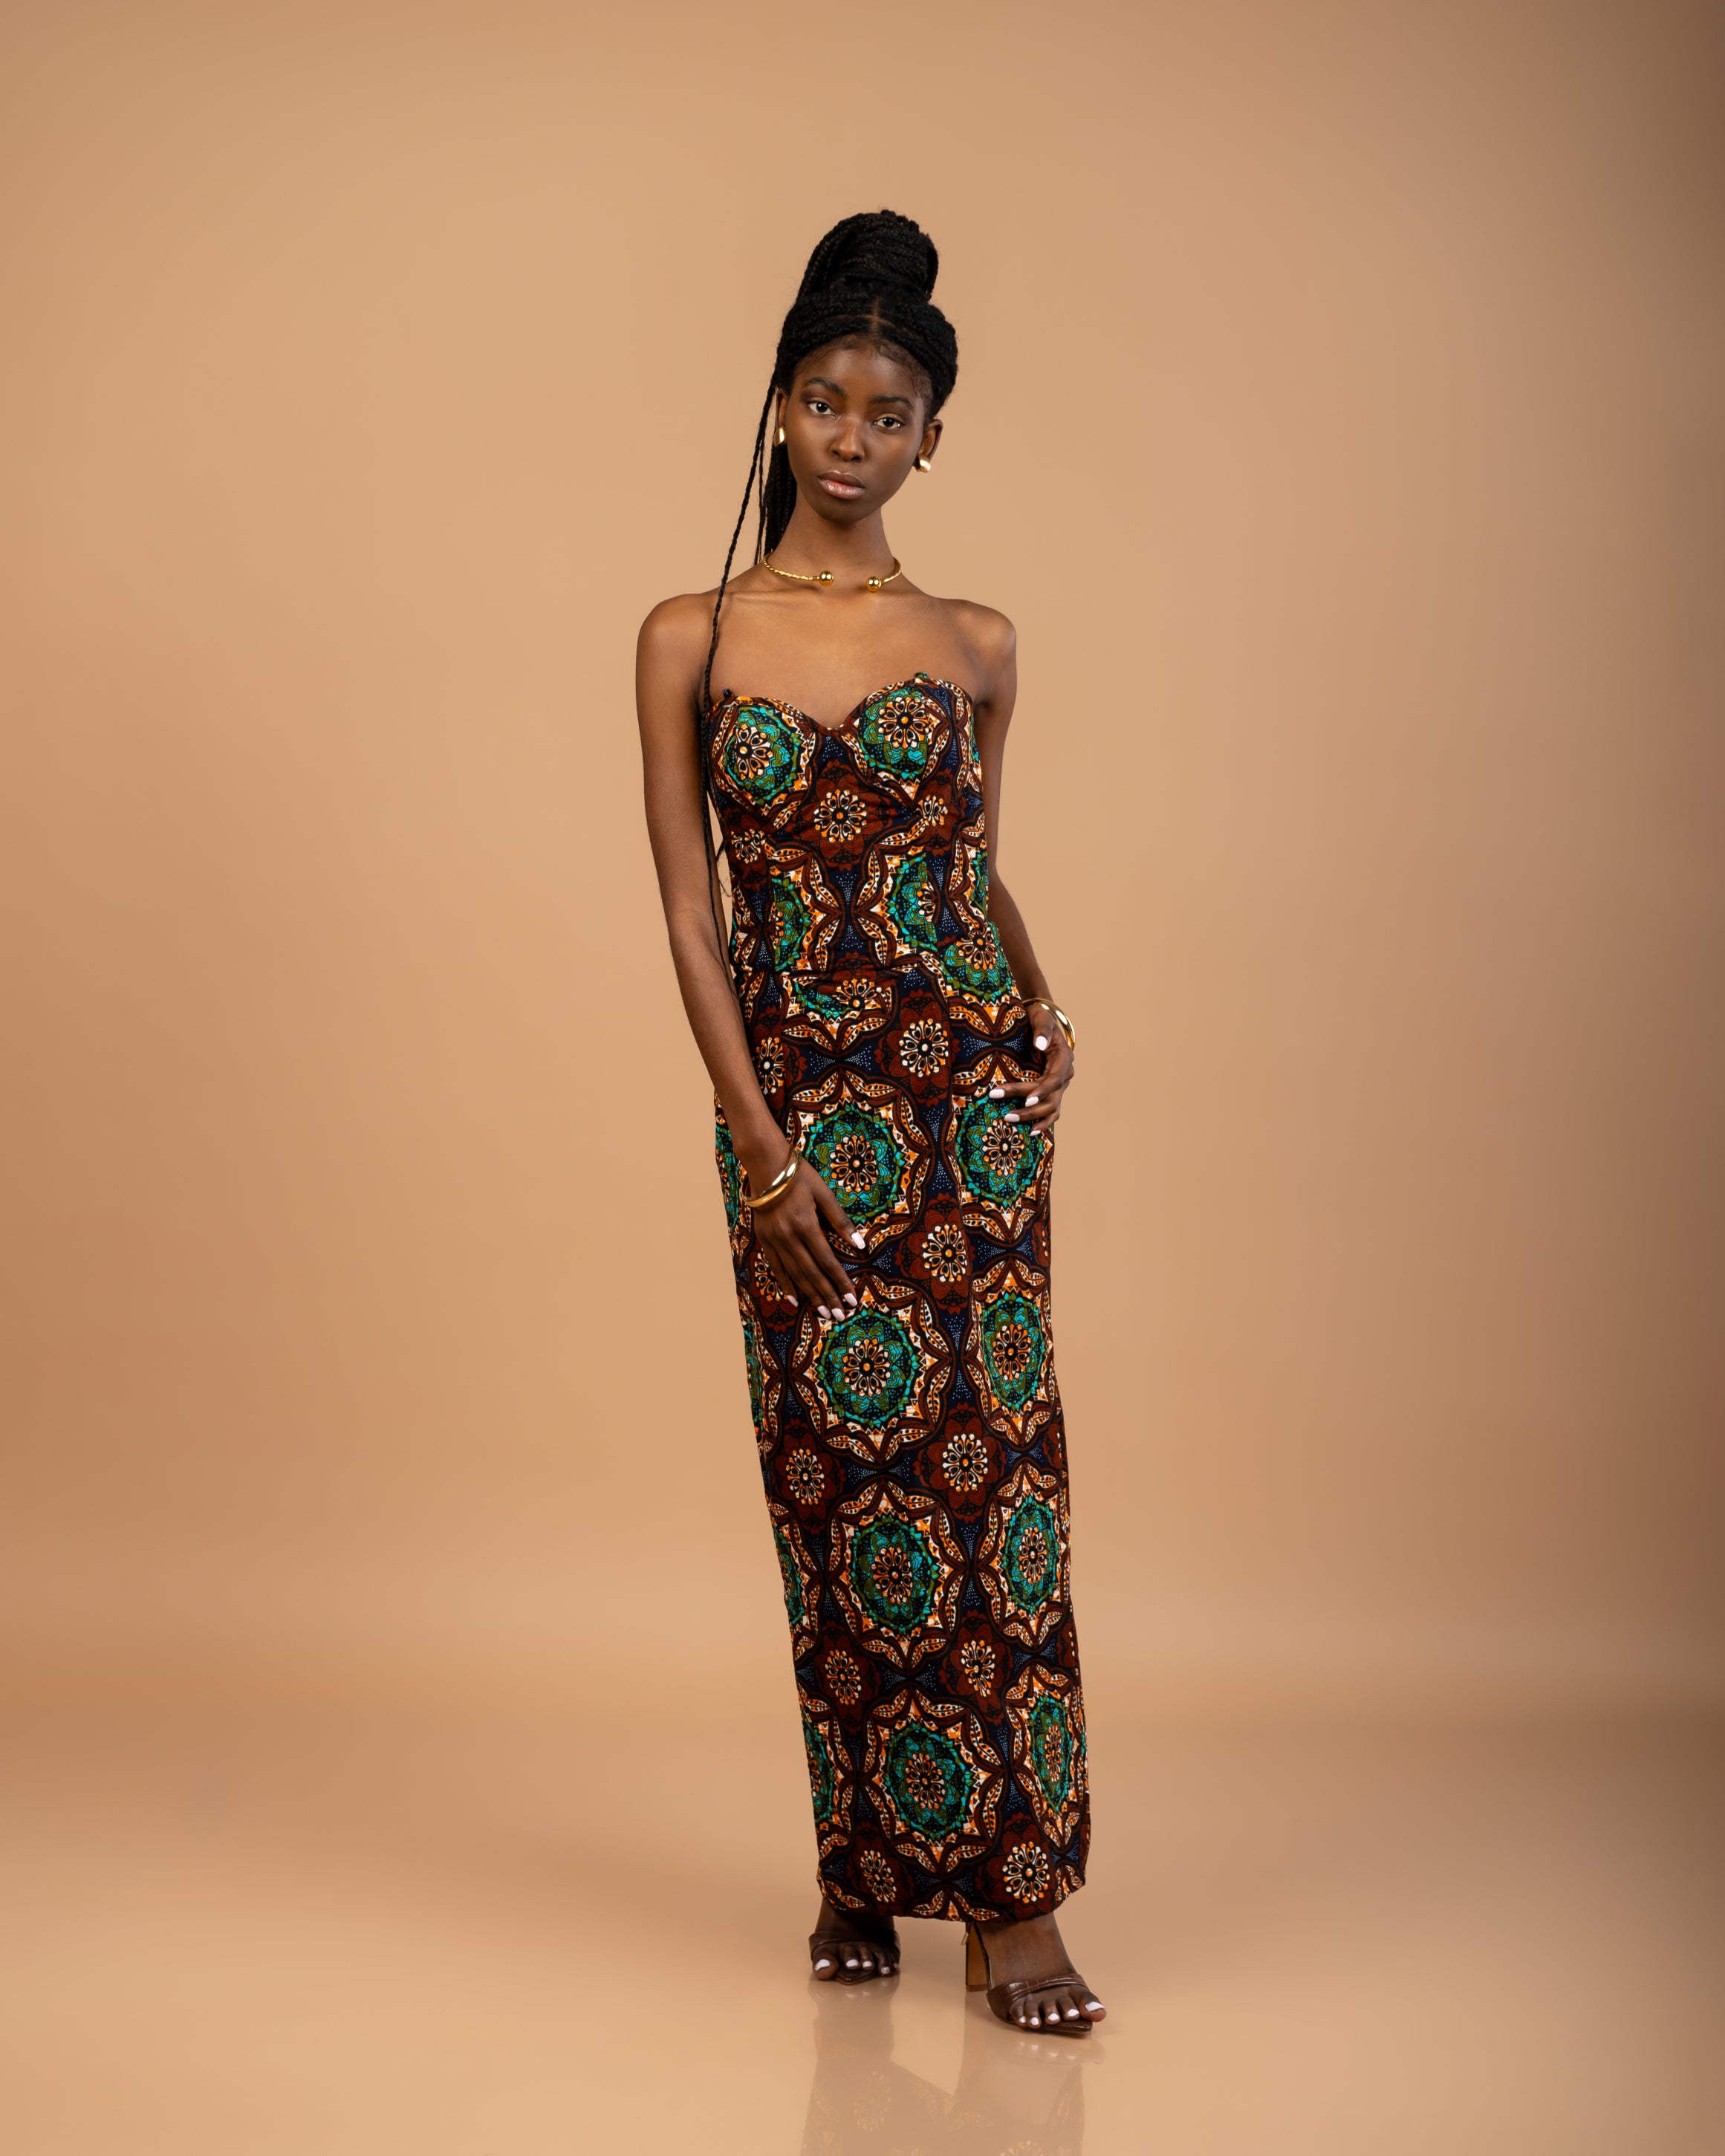 Handmade African Print strapless sweetheart corset dress with boning and back tie: 100% cotton high-quality African Ankara wax fabric 